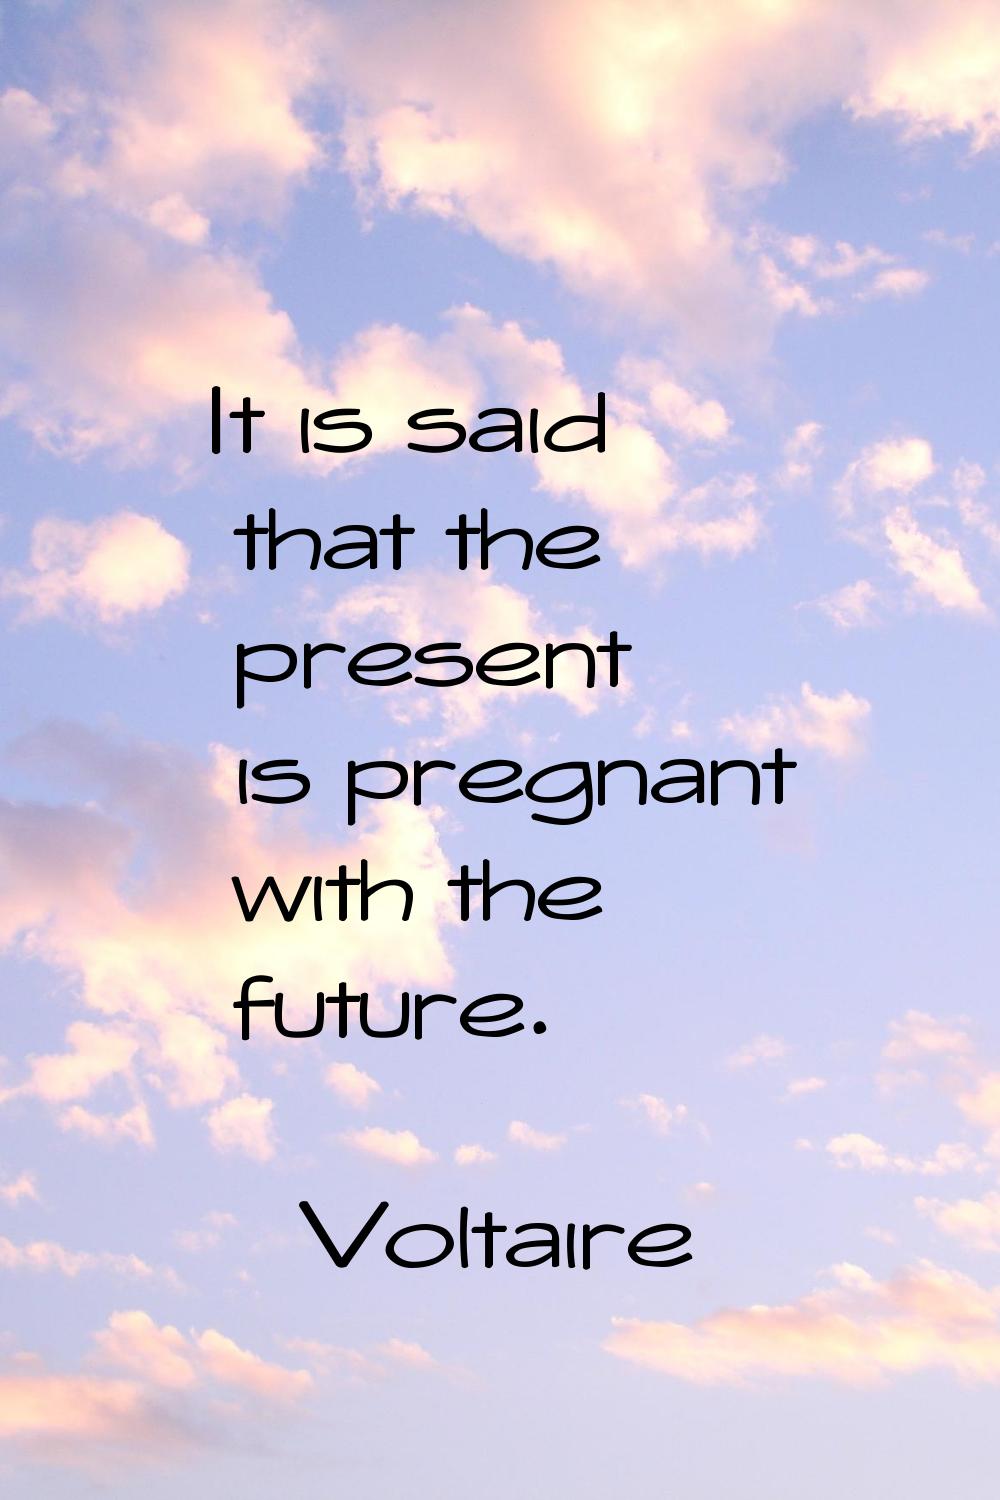 It is said that the present is pregnant with the future.